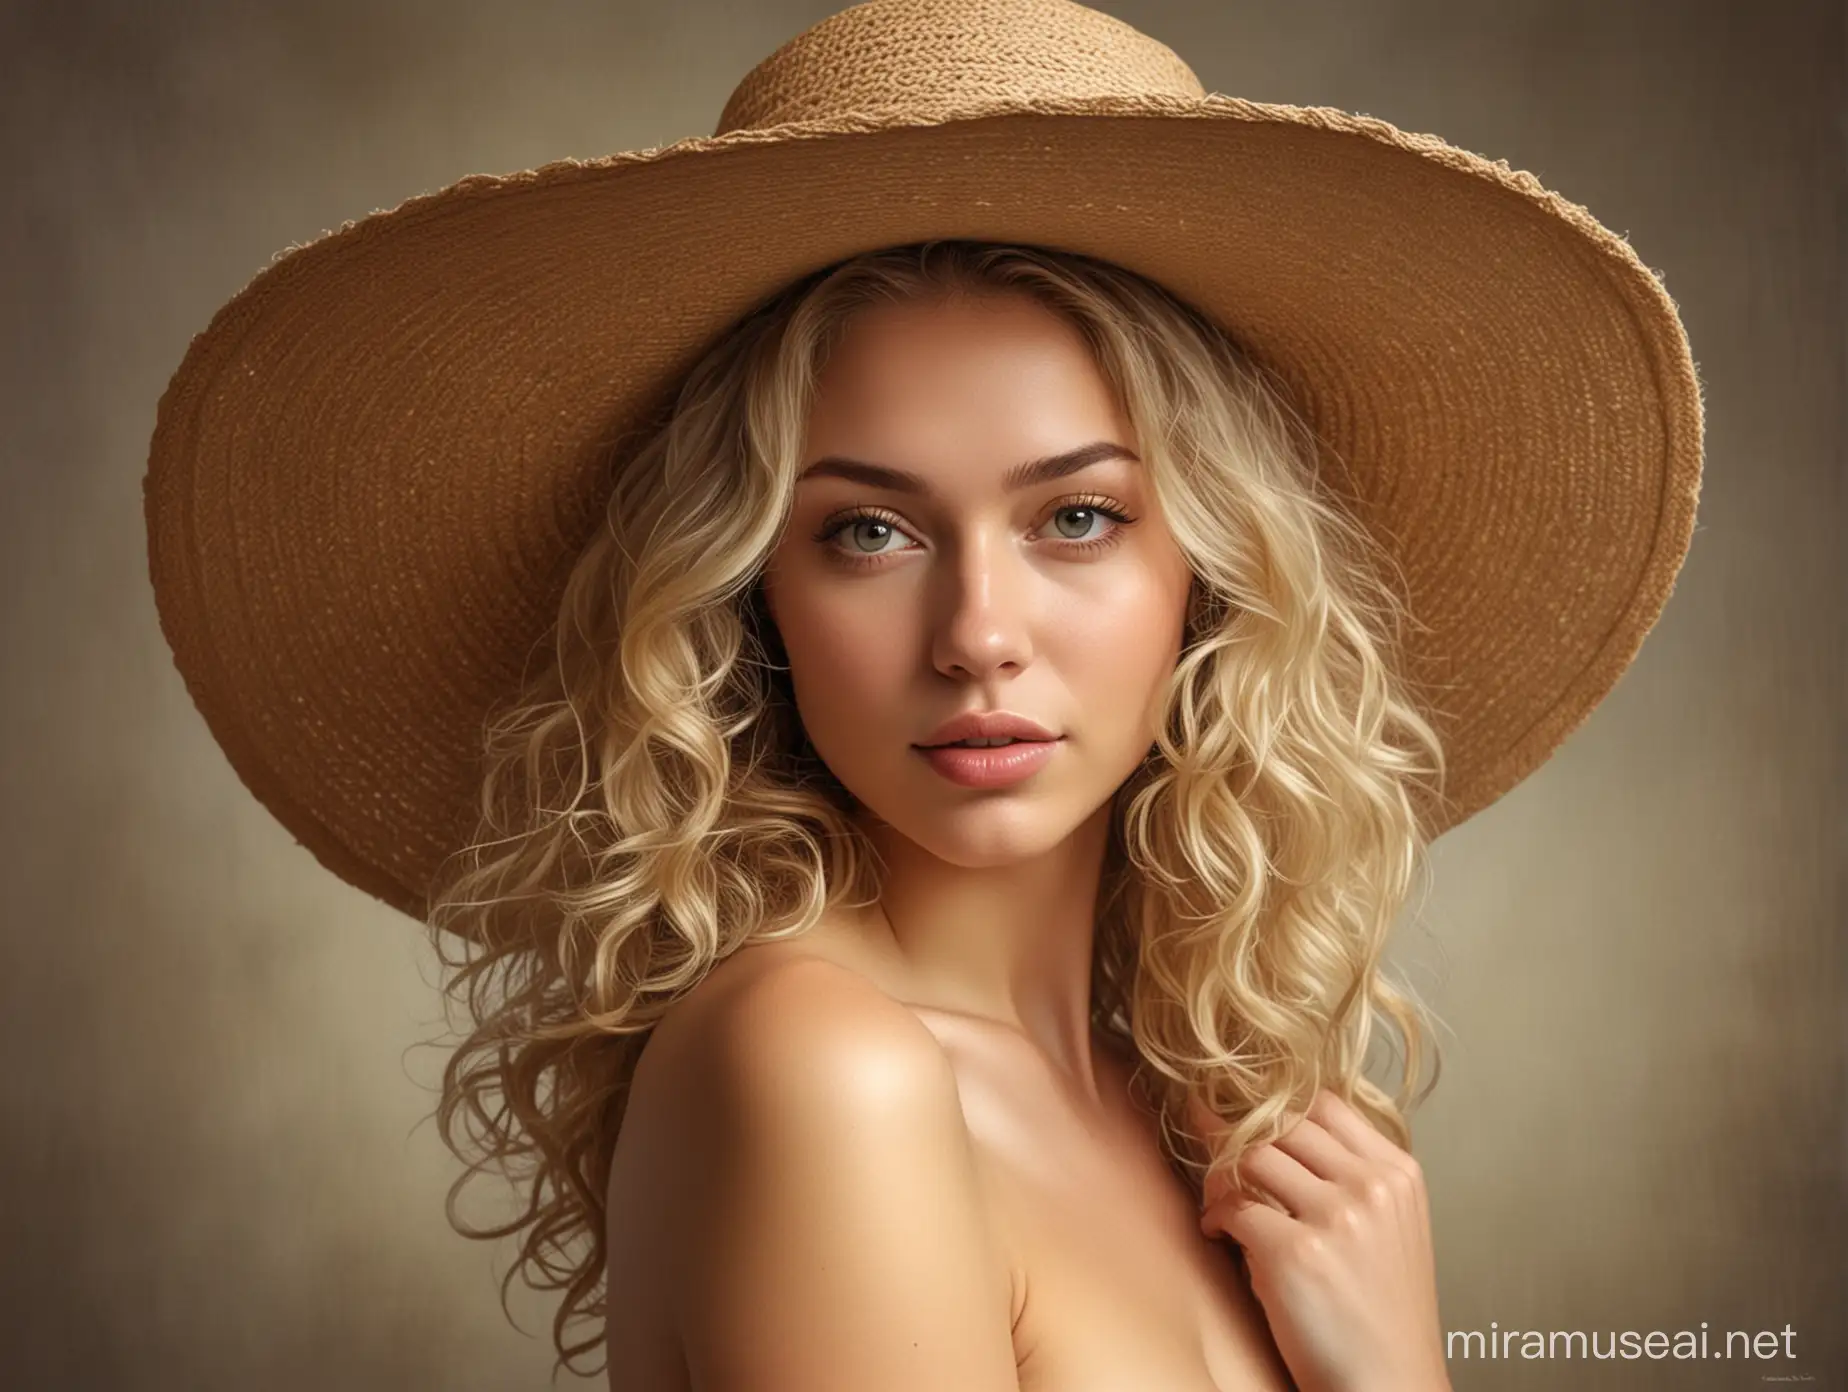 Curly Blonde Model in WideBrimmed Hat Seated for Artistic Portrait